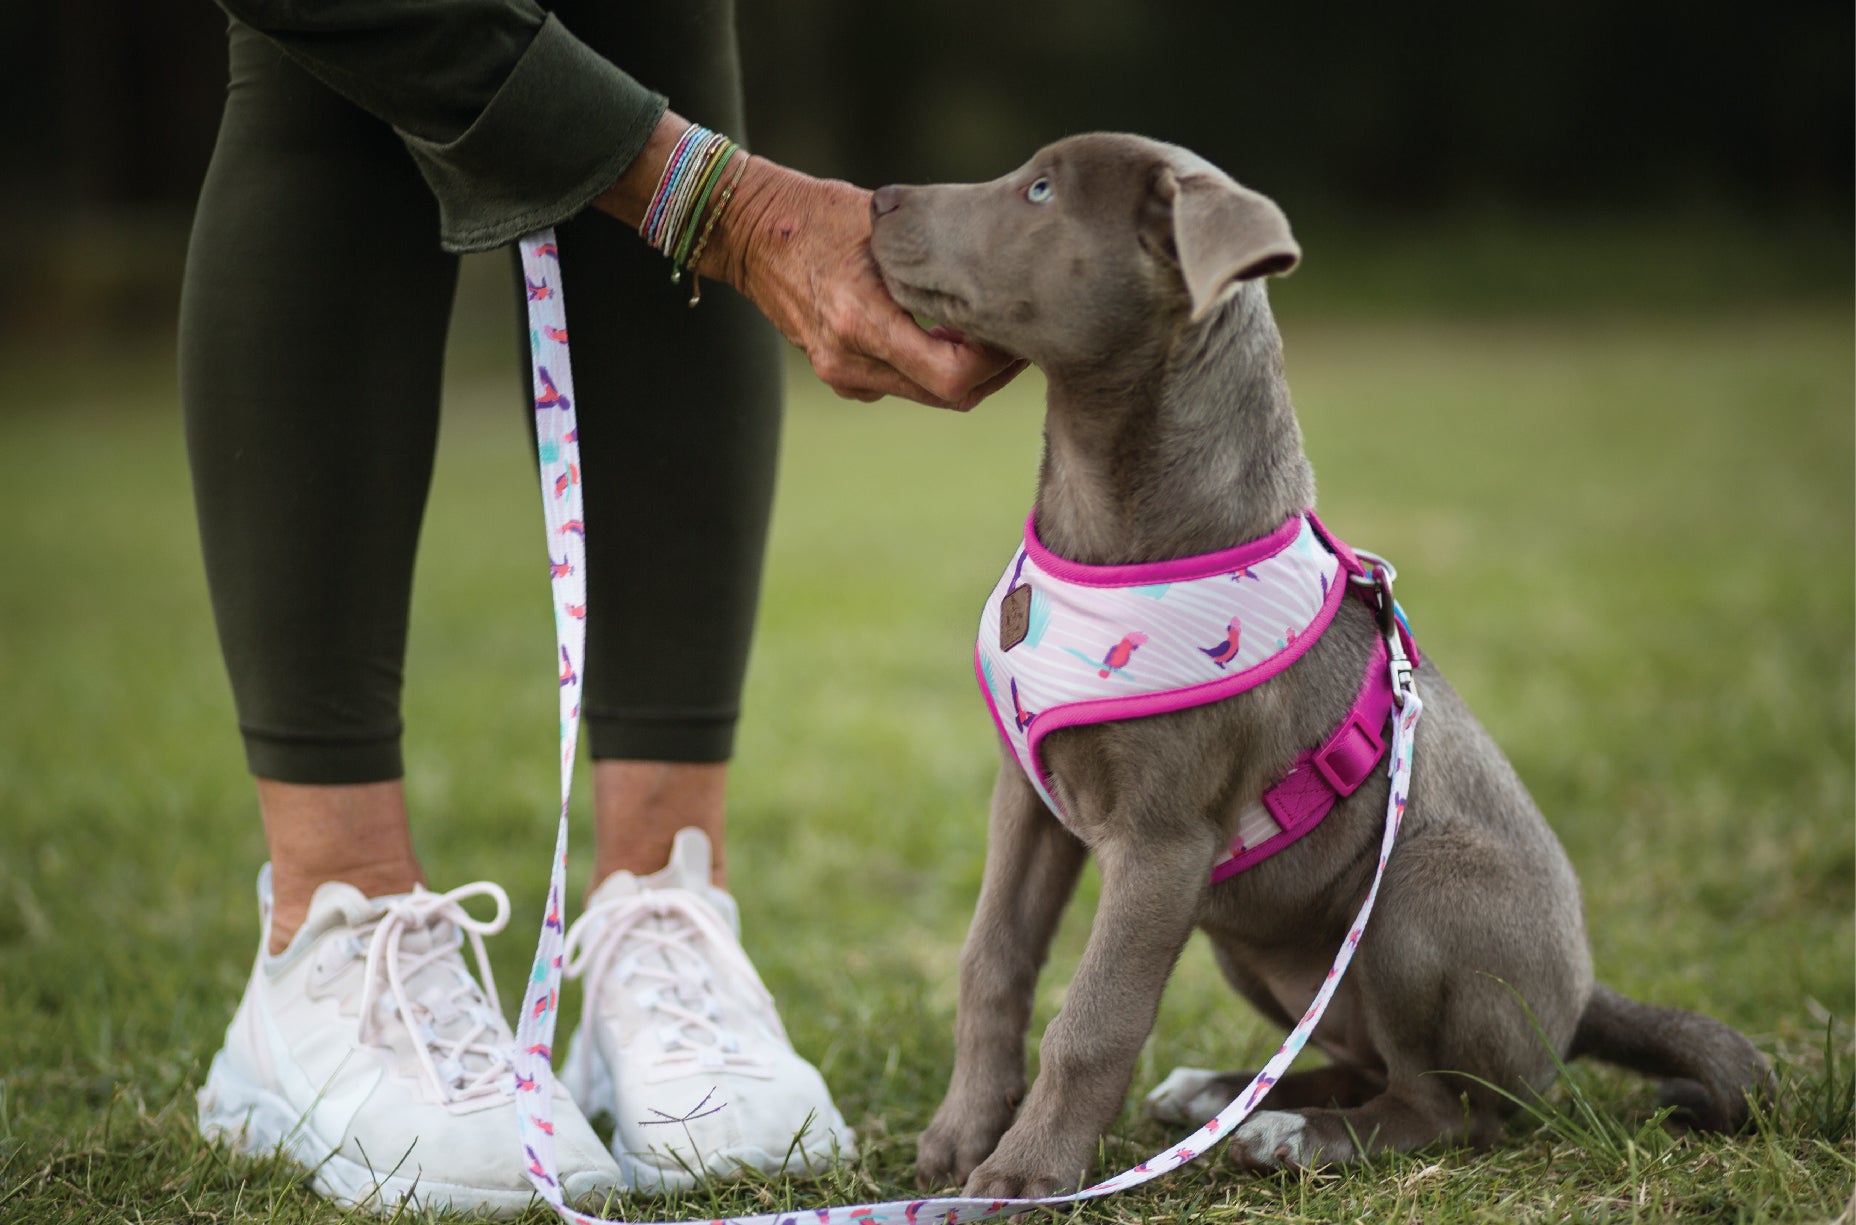 Cute puppy in dog harness sitting by owner holding lead